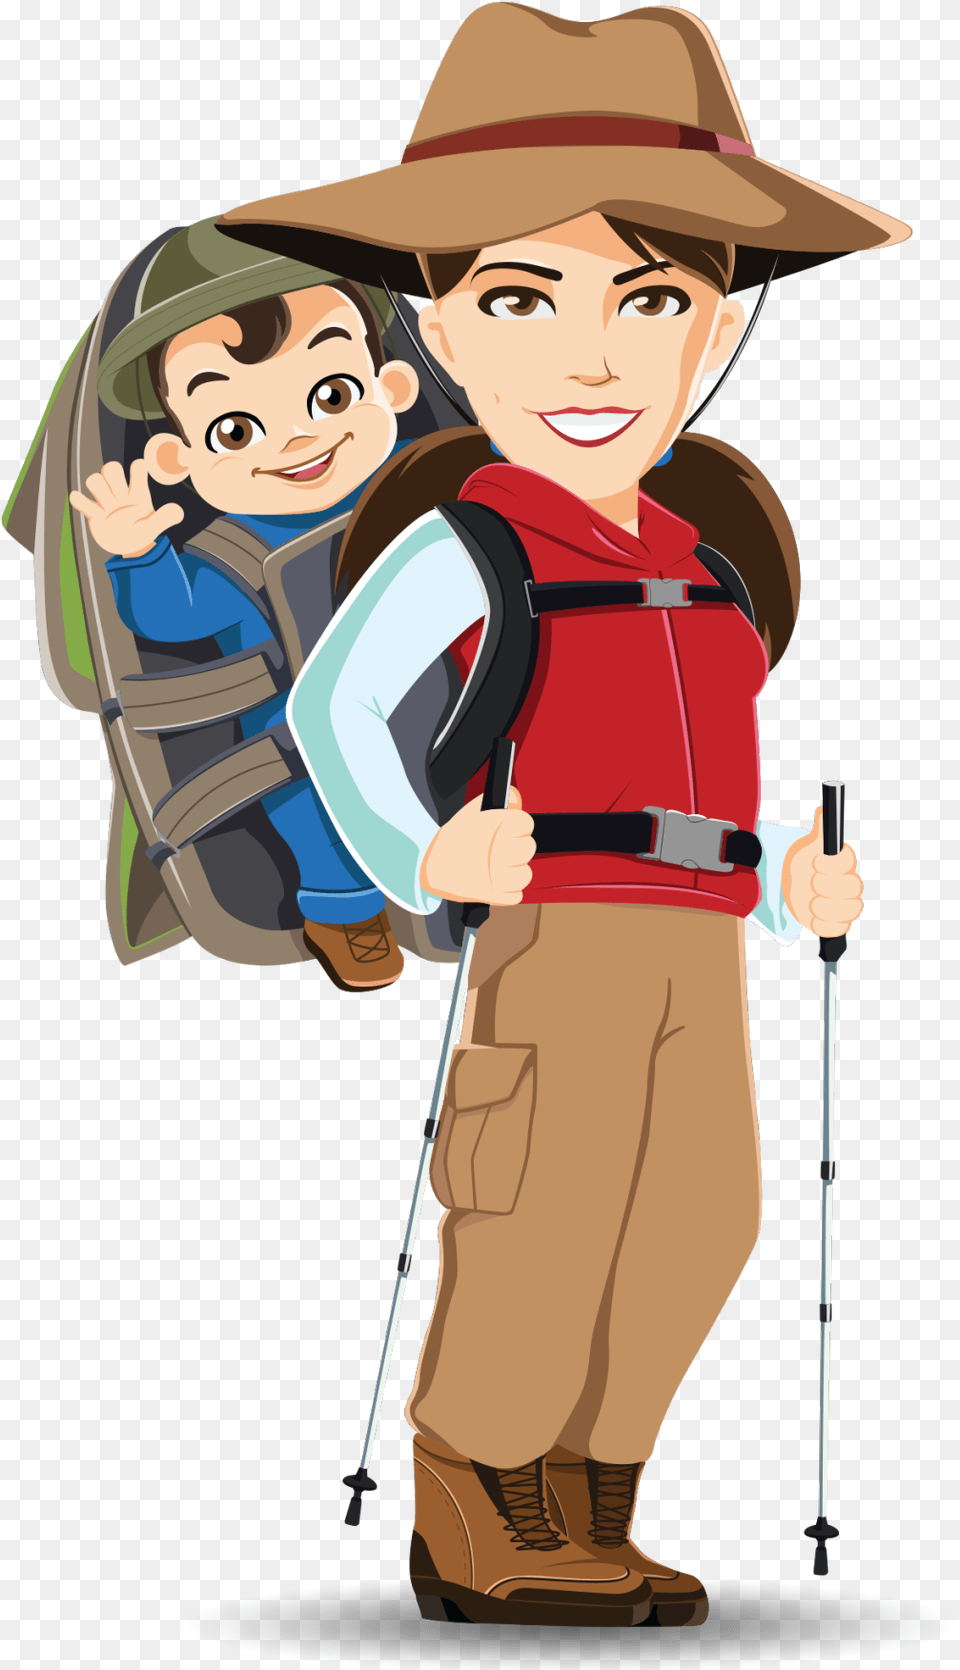 Hiking With Baby Cartoon Appalachian Female Hiker Clip Art, Vest, Clothing, Lifejacket, Hat Png